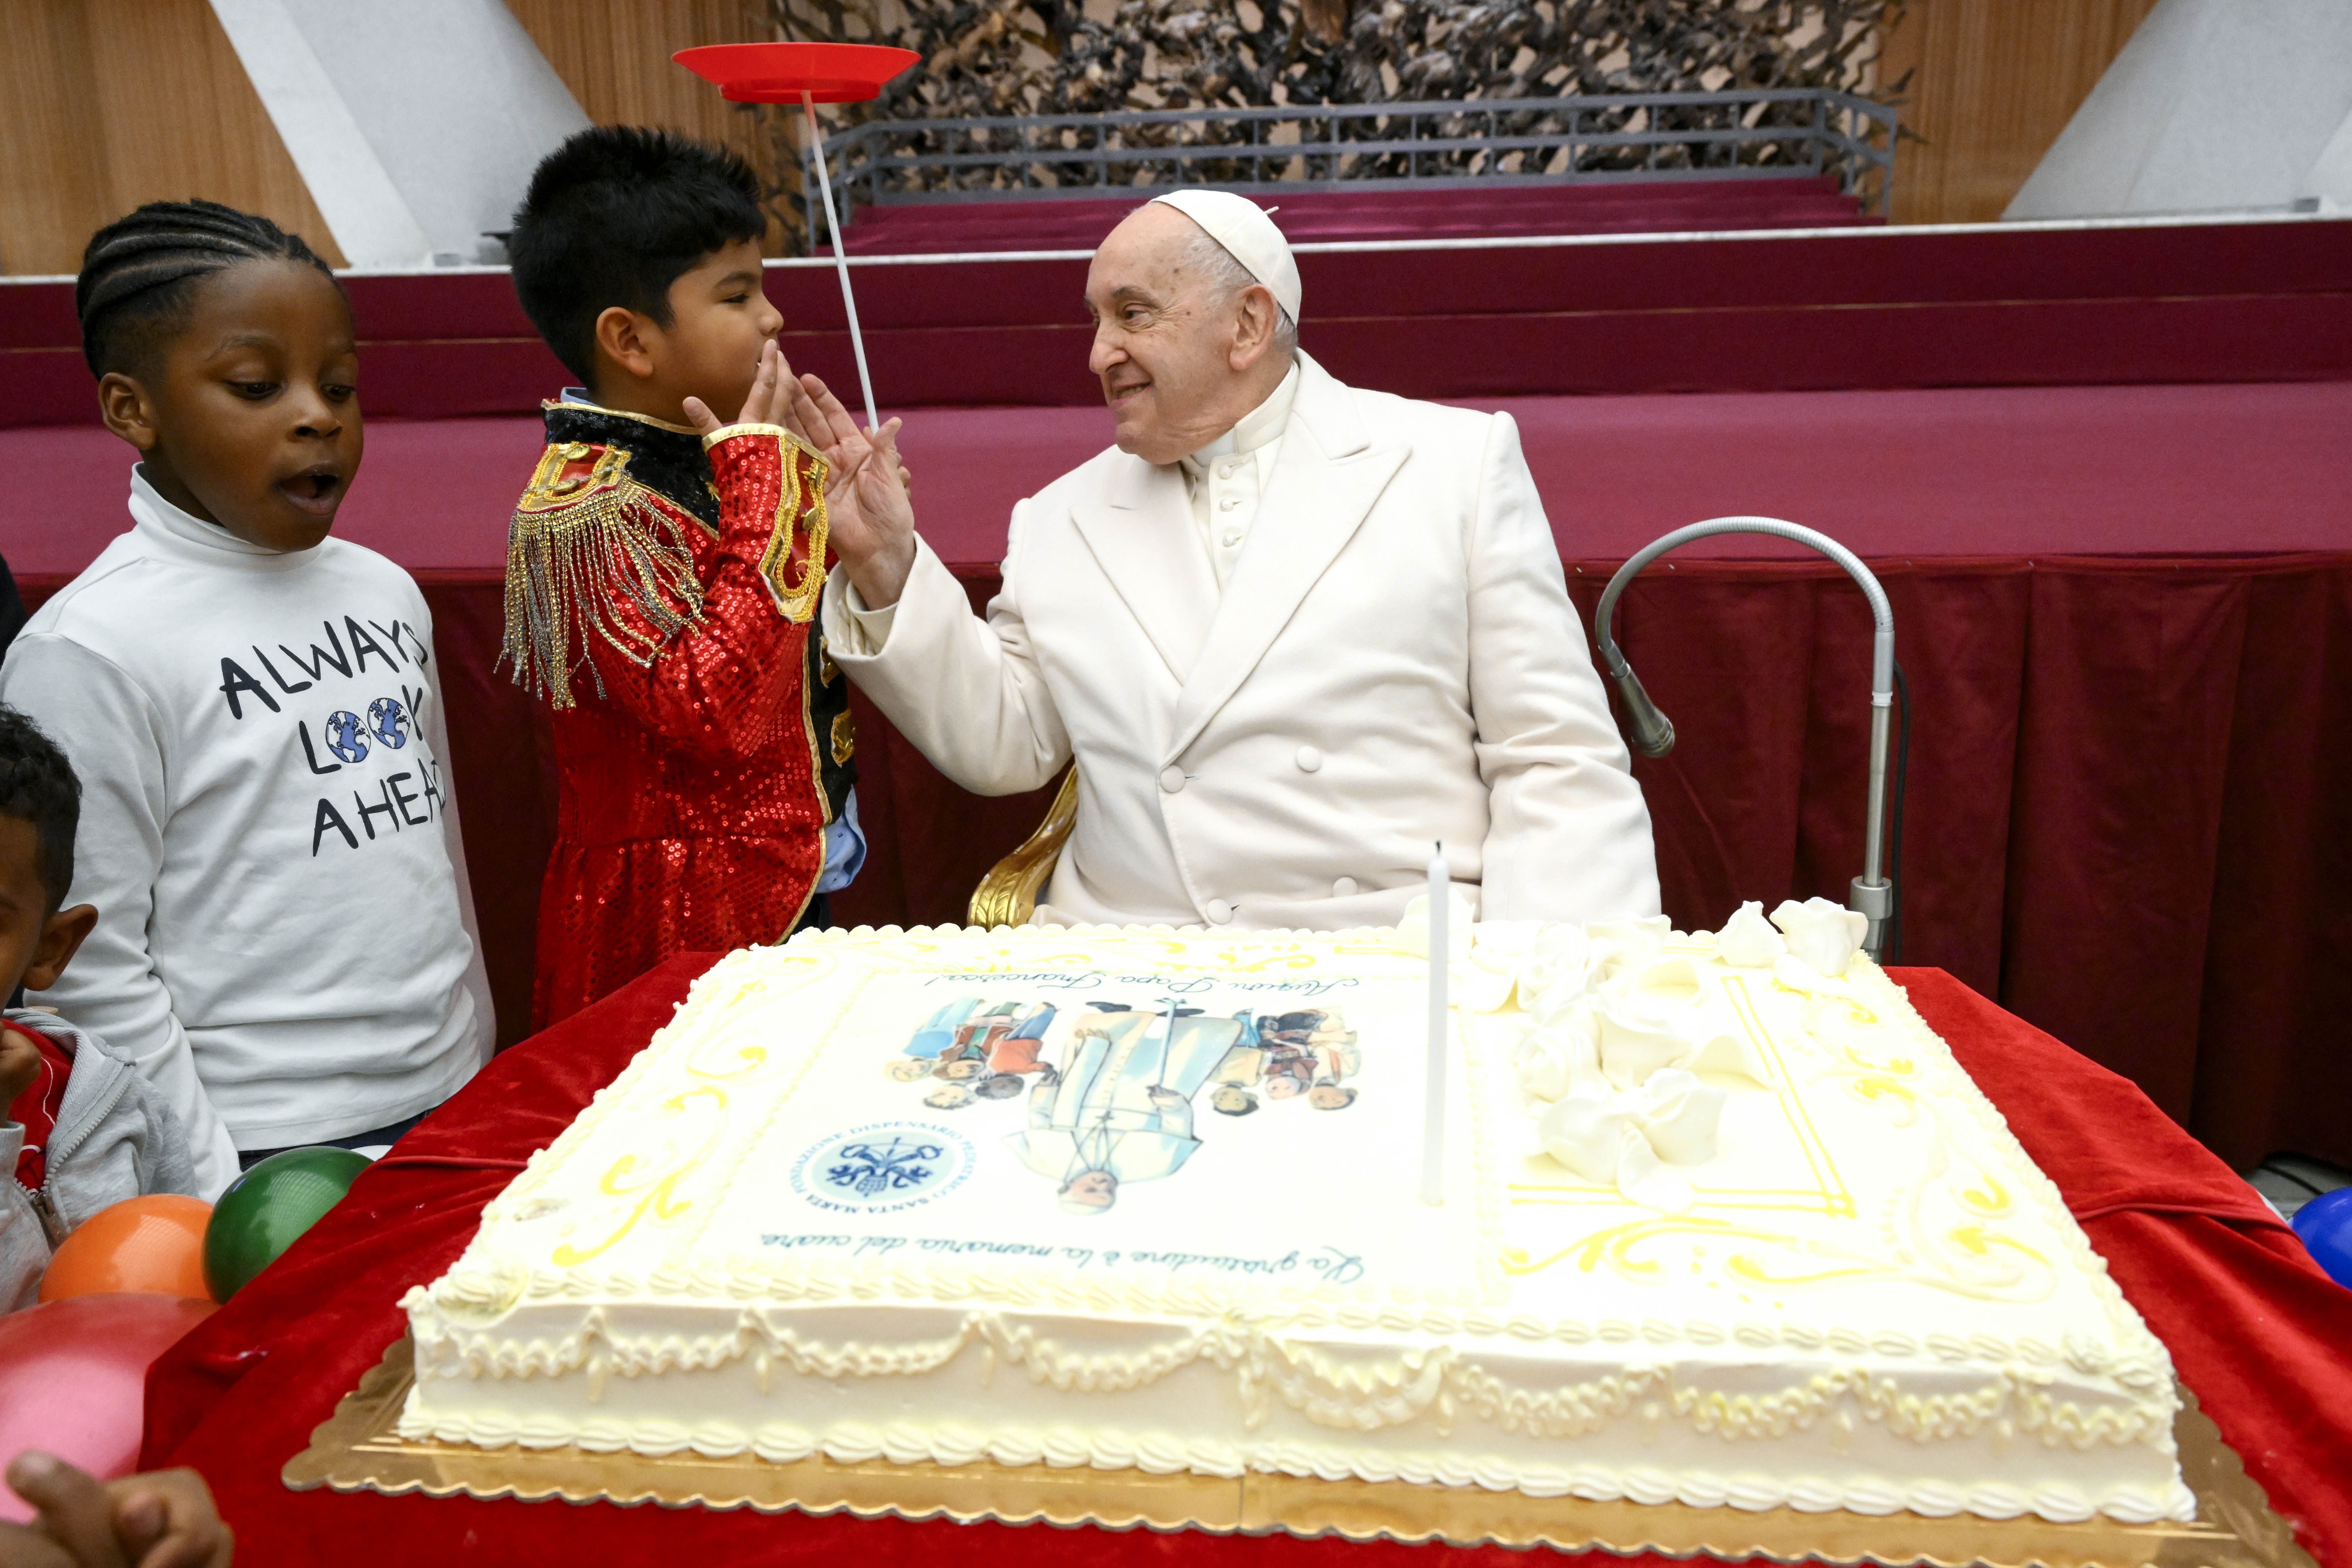 Pope Francis celebrates 87th birthday with children who receive aid from Vatican clinic